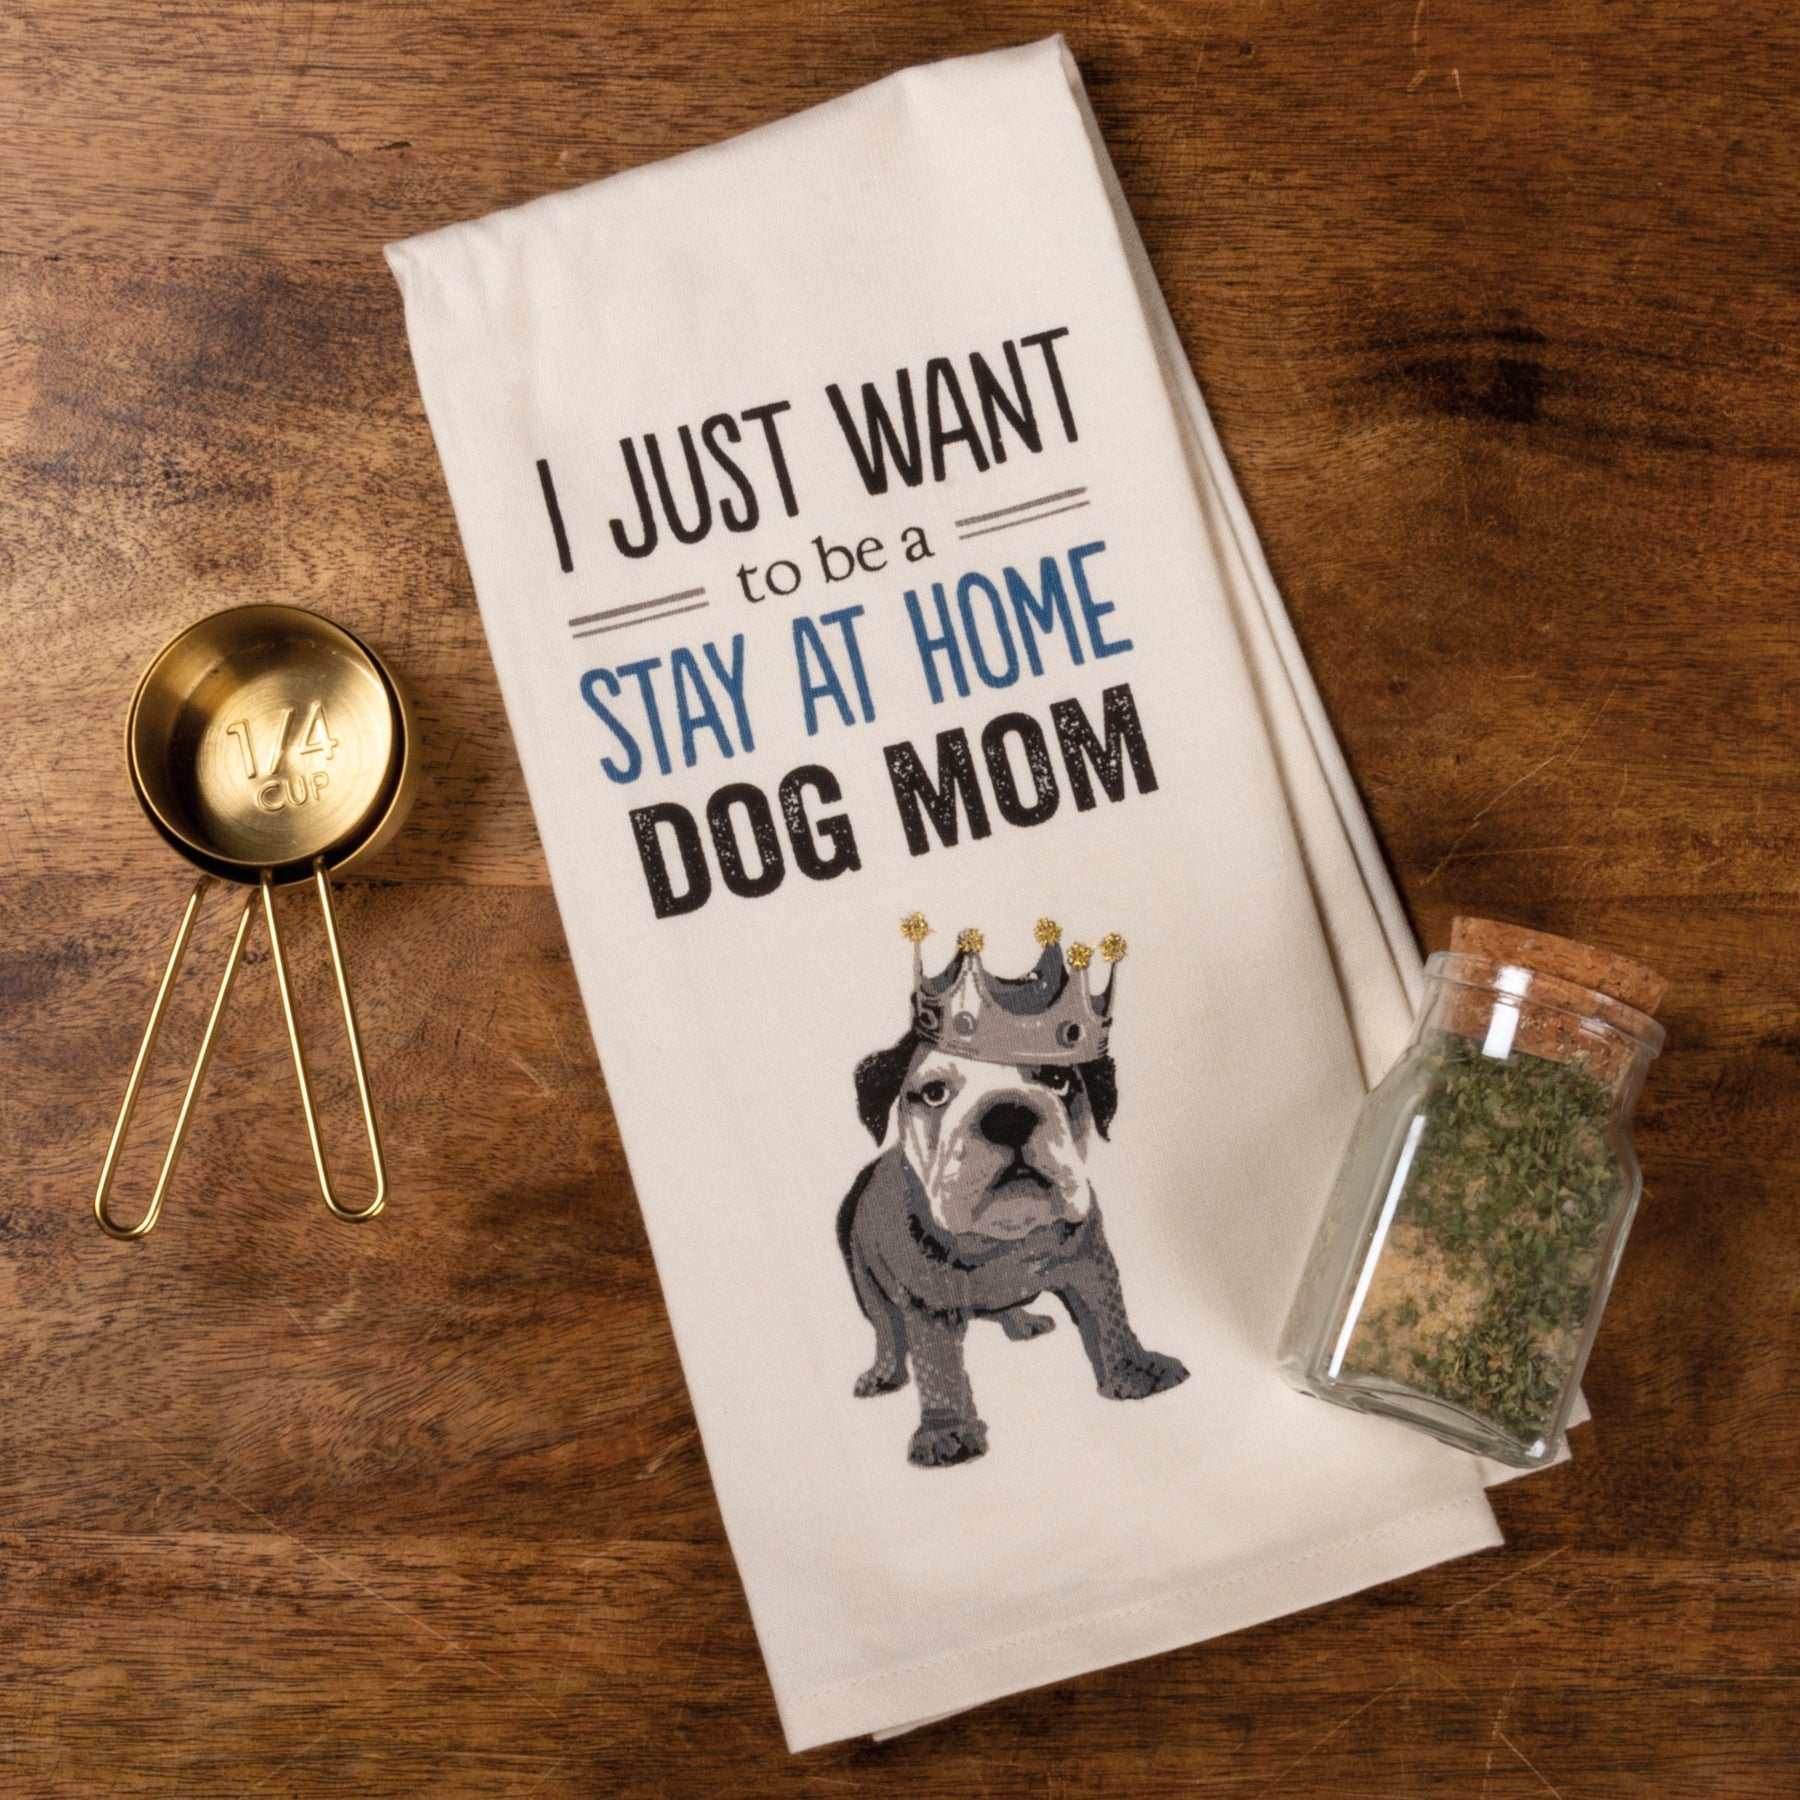 I Just Want to Be a Stay at Home Dog Mom Dish Towel